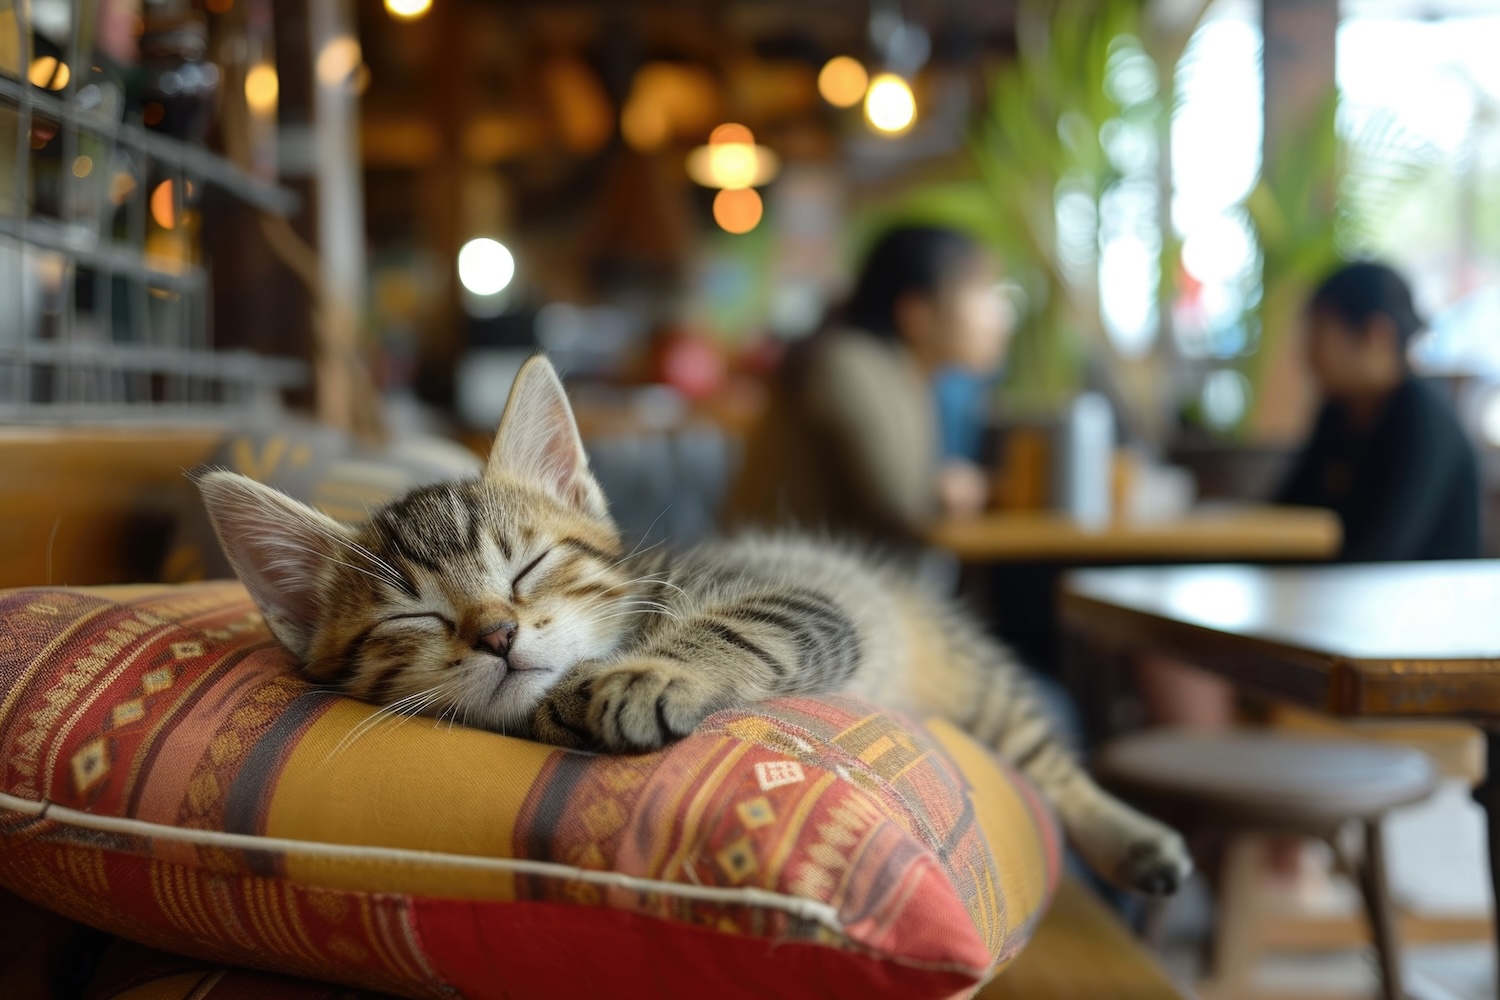 A young cat sleeping on a cushion in a cat-friendly cafe